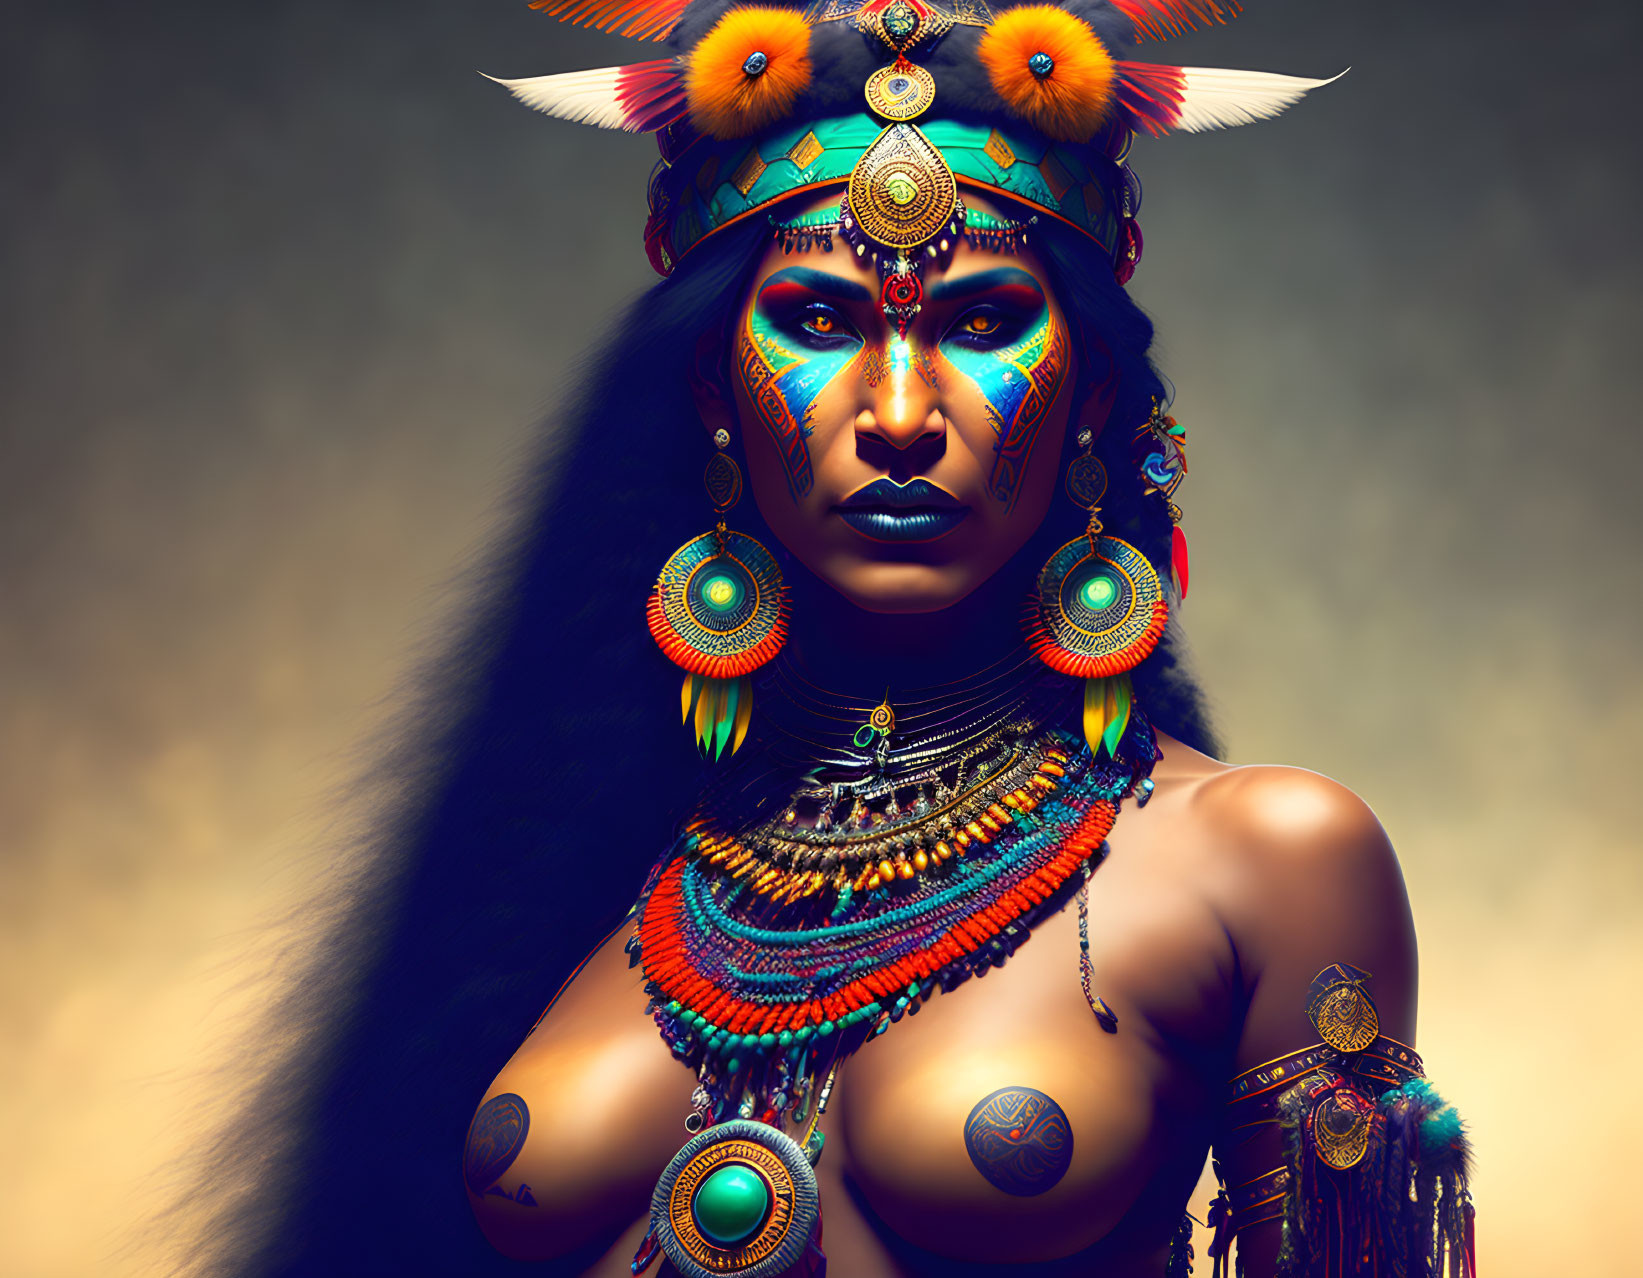 Portrait of Woman with Blue Facial Paint and Tribal Headdress